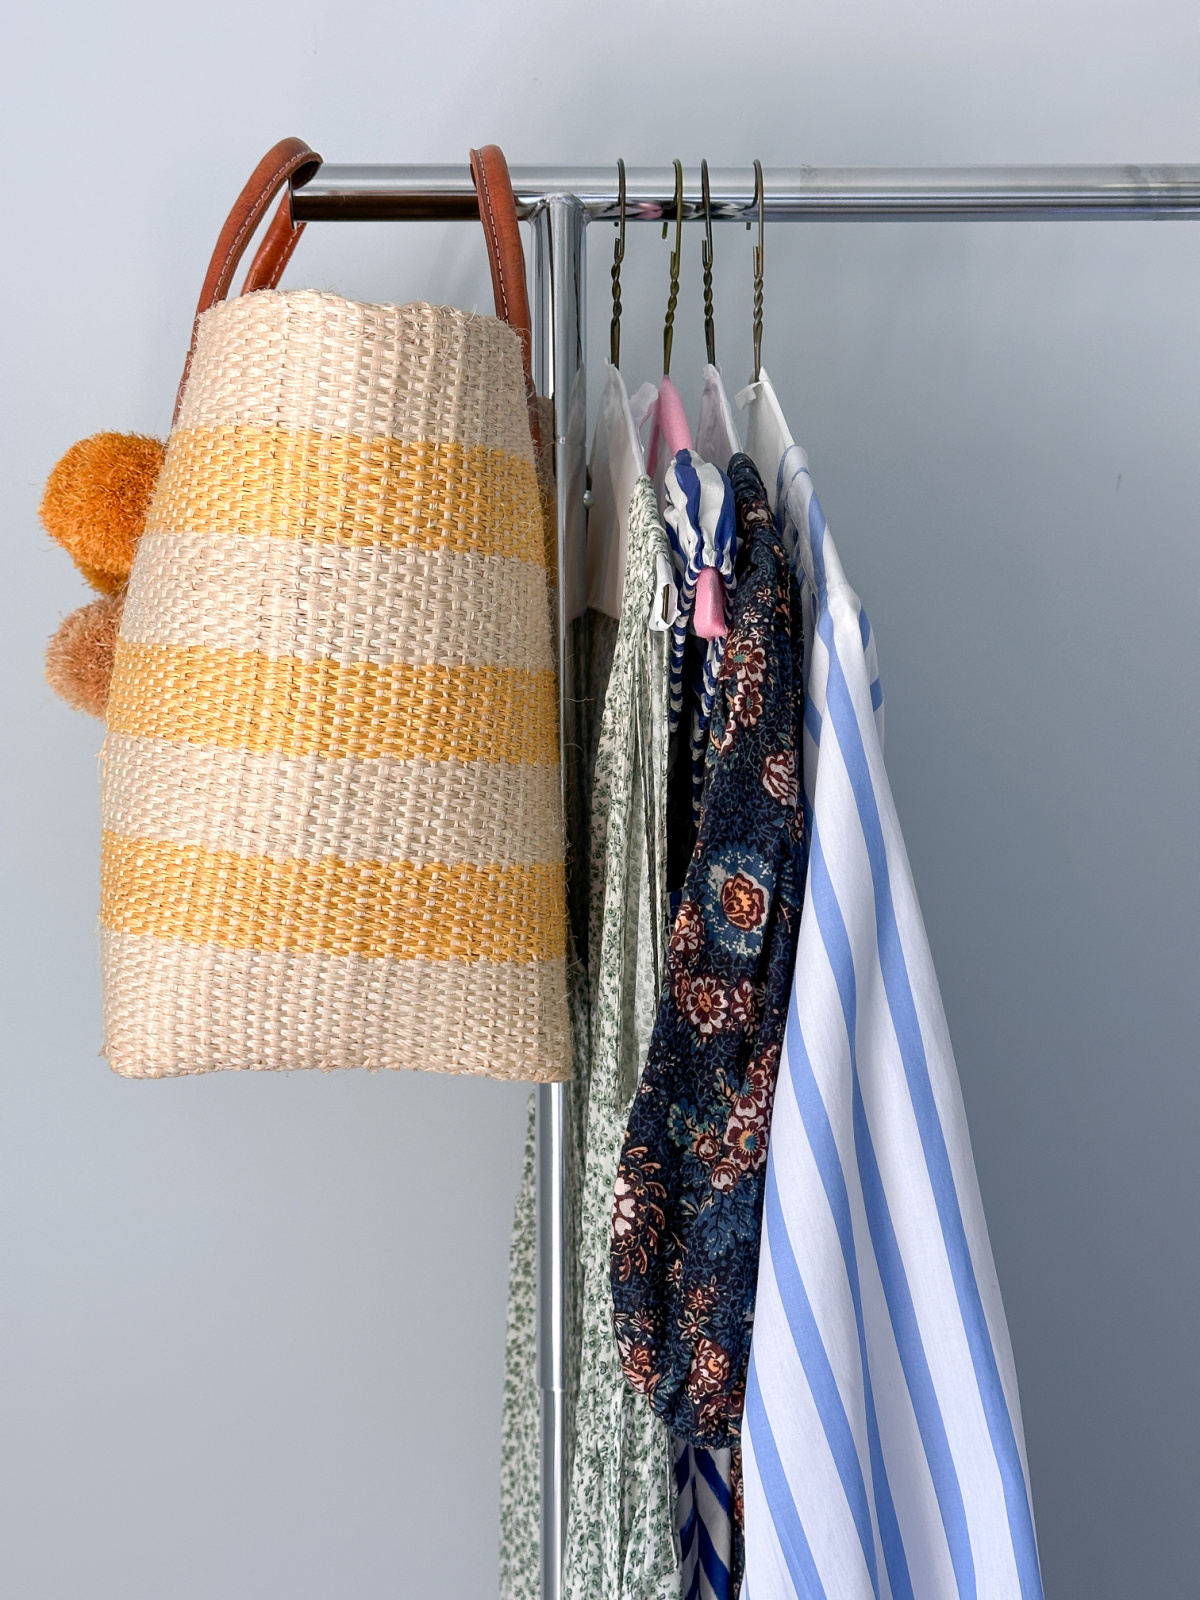 Mar Y Sol tote in yellow and white stripes hanging on rack next two summer dresses.